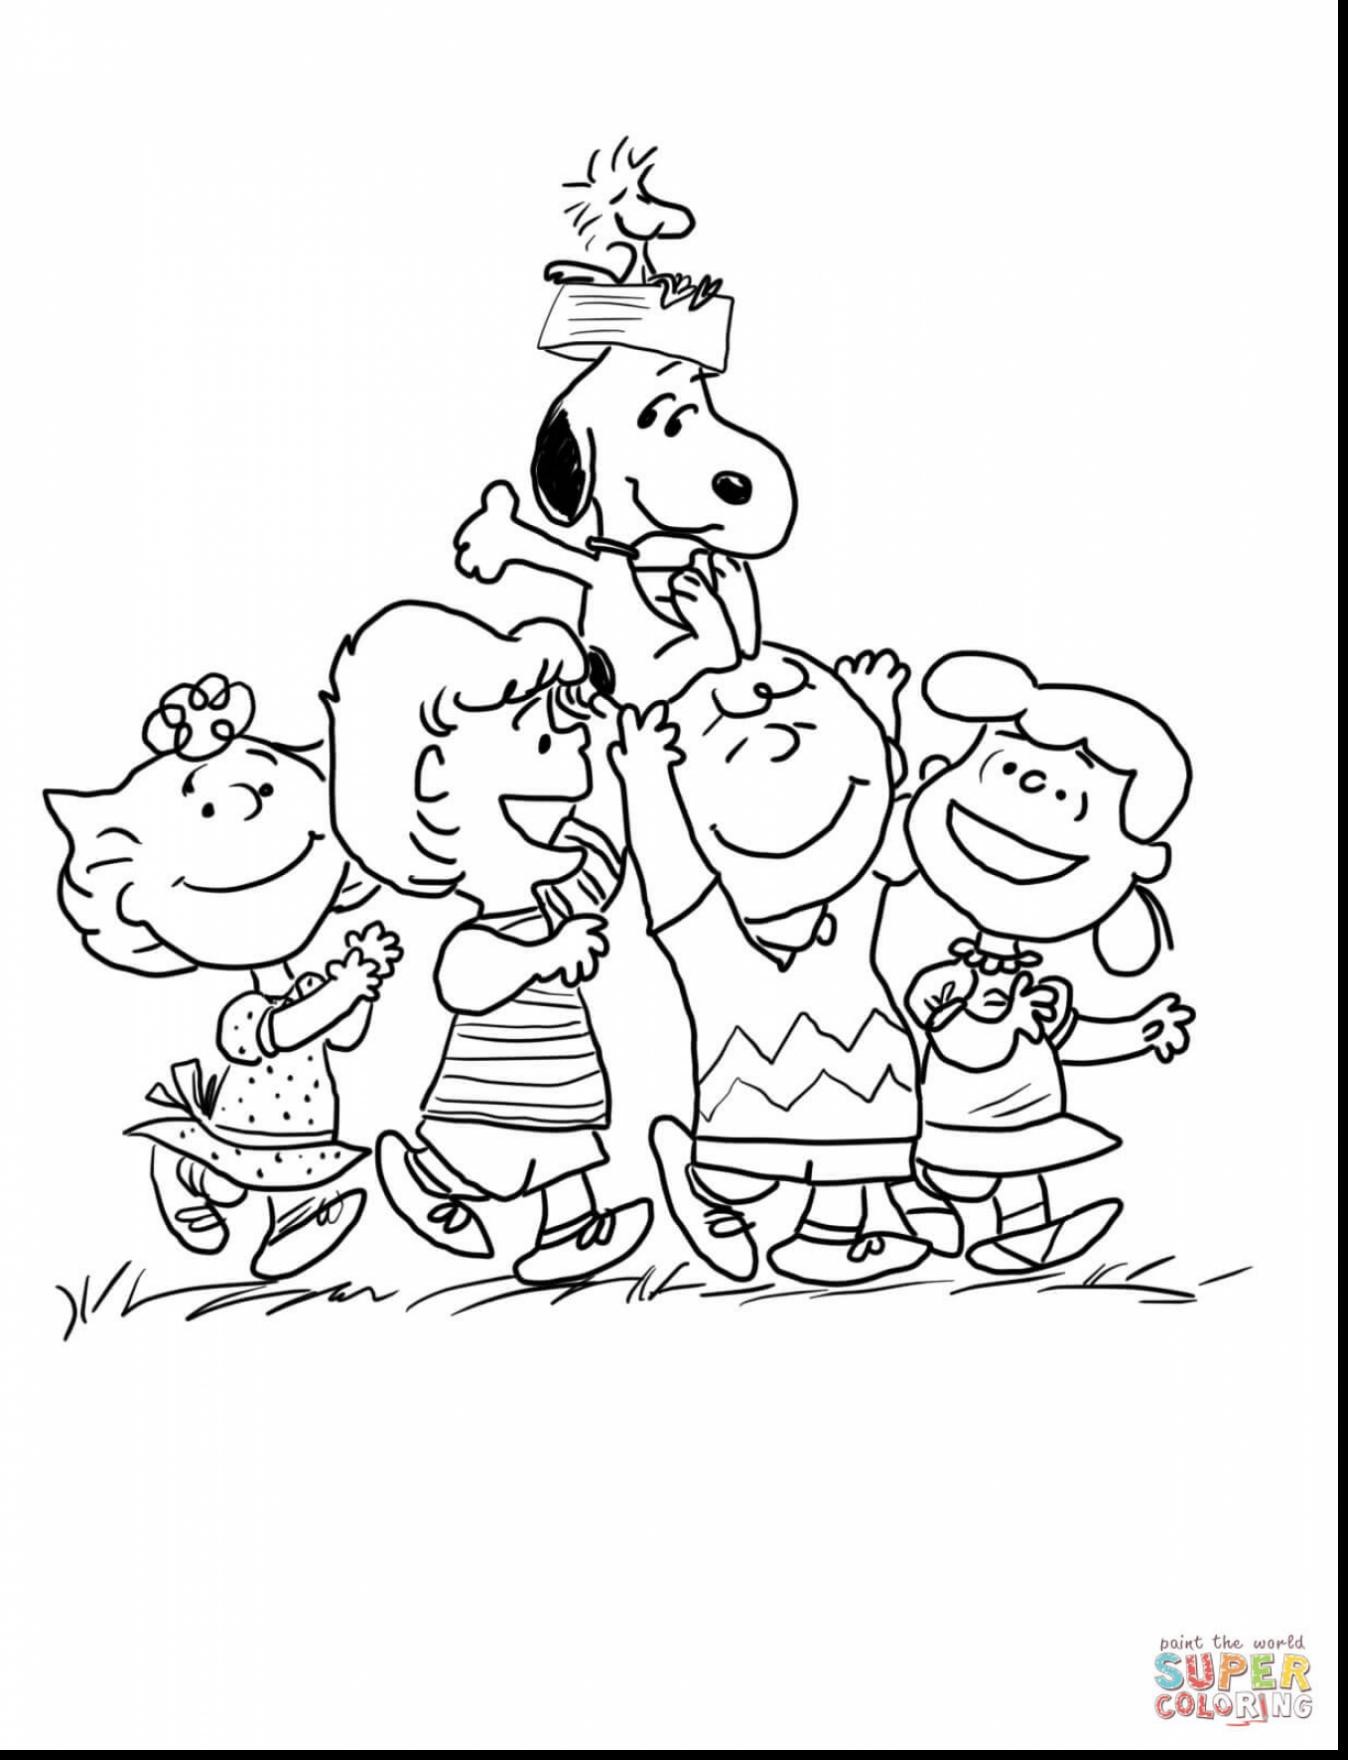 Charlie Brown Christmas Coloring Pages at GetColoringscom